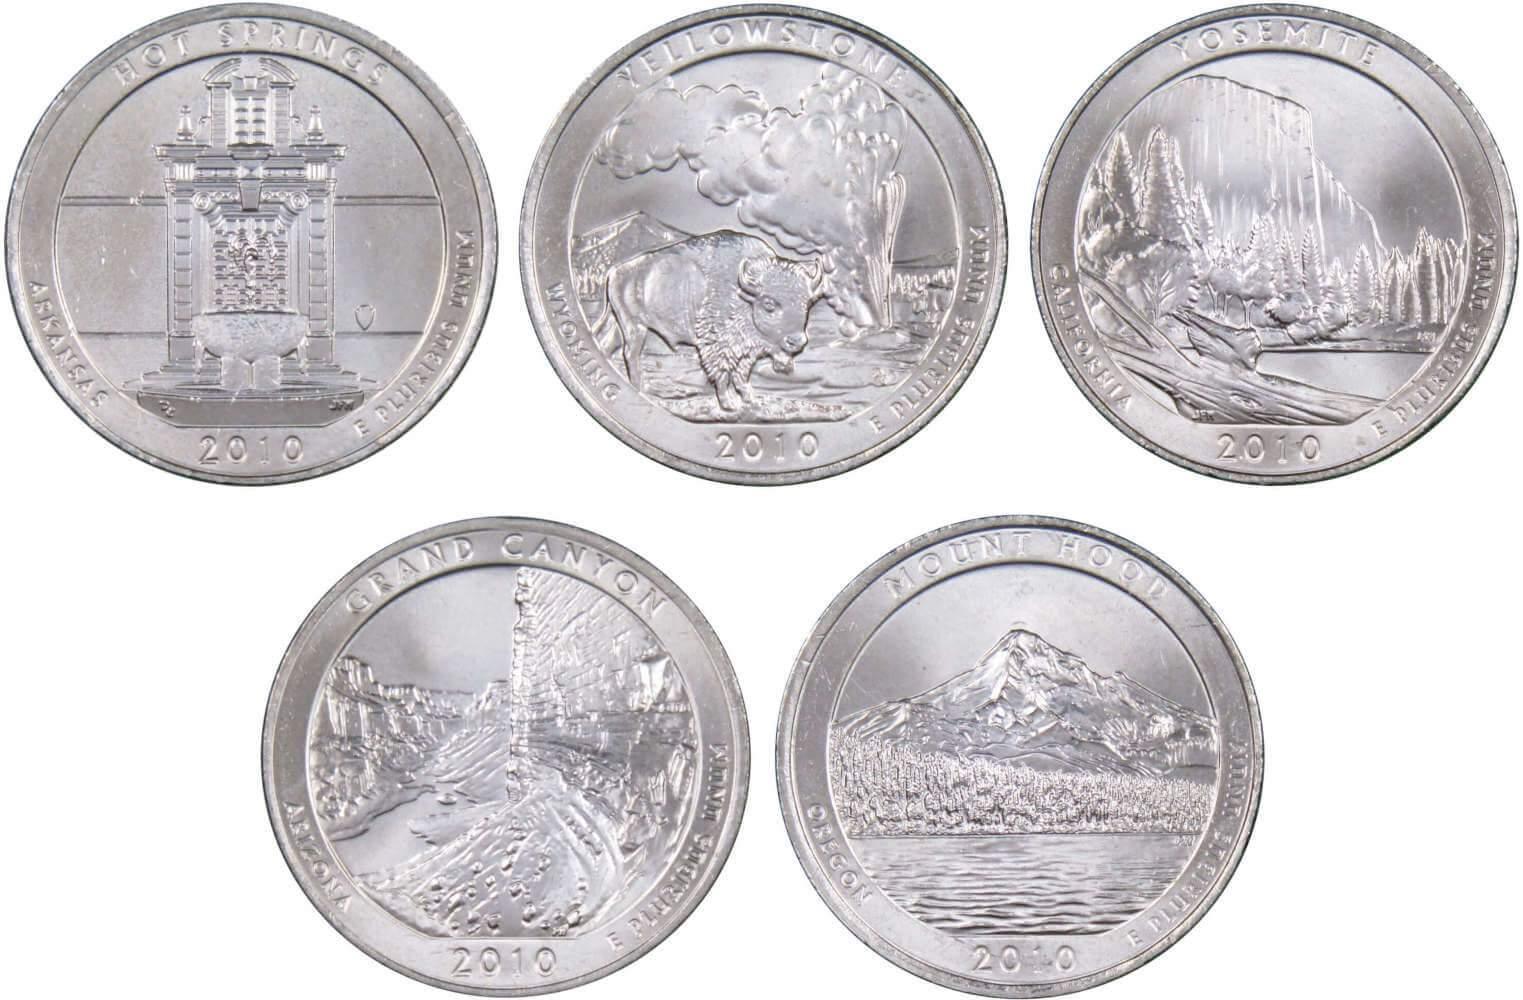 2010 D National Park Quarter 5 Coin Set Uncirculated Mint State 25c Collectible